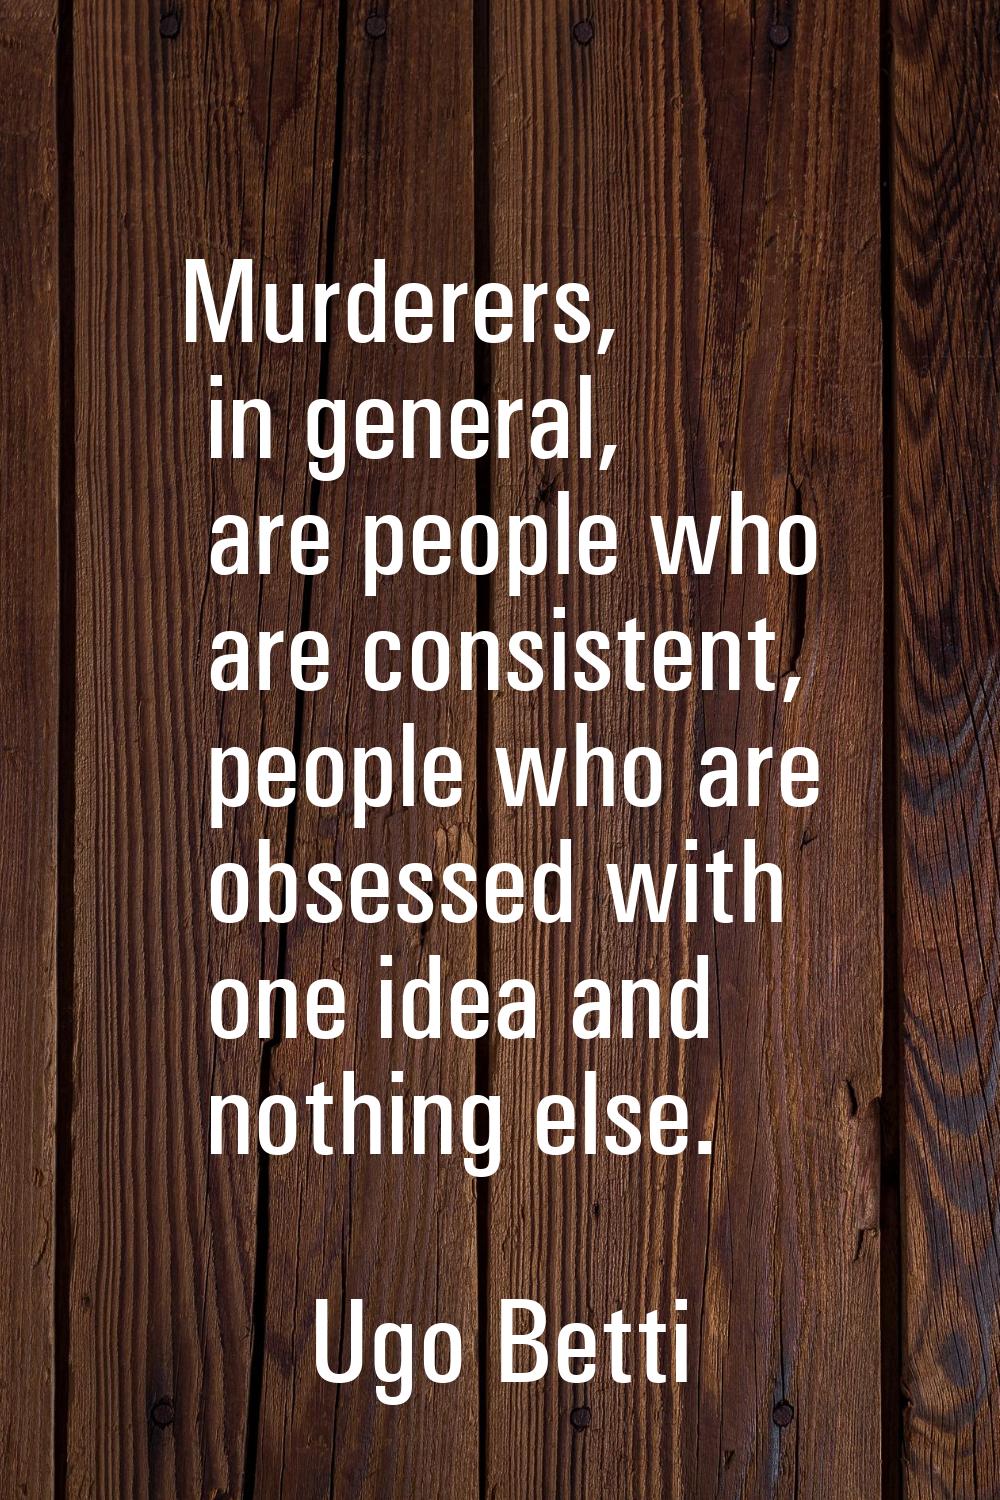 Murderers, in general, are people who are consistent, people who are obsessed with one idea and not